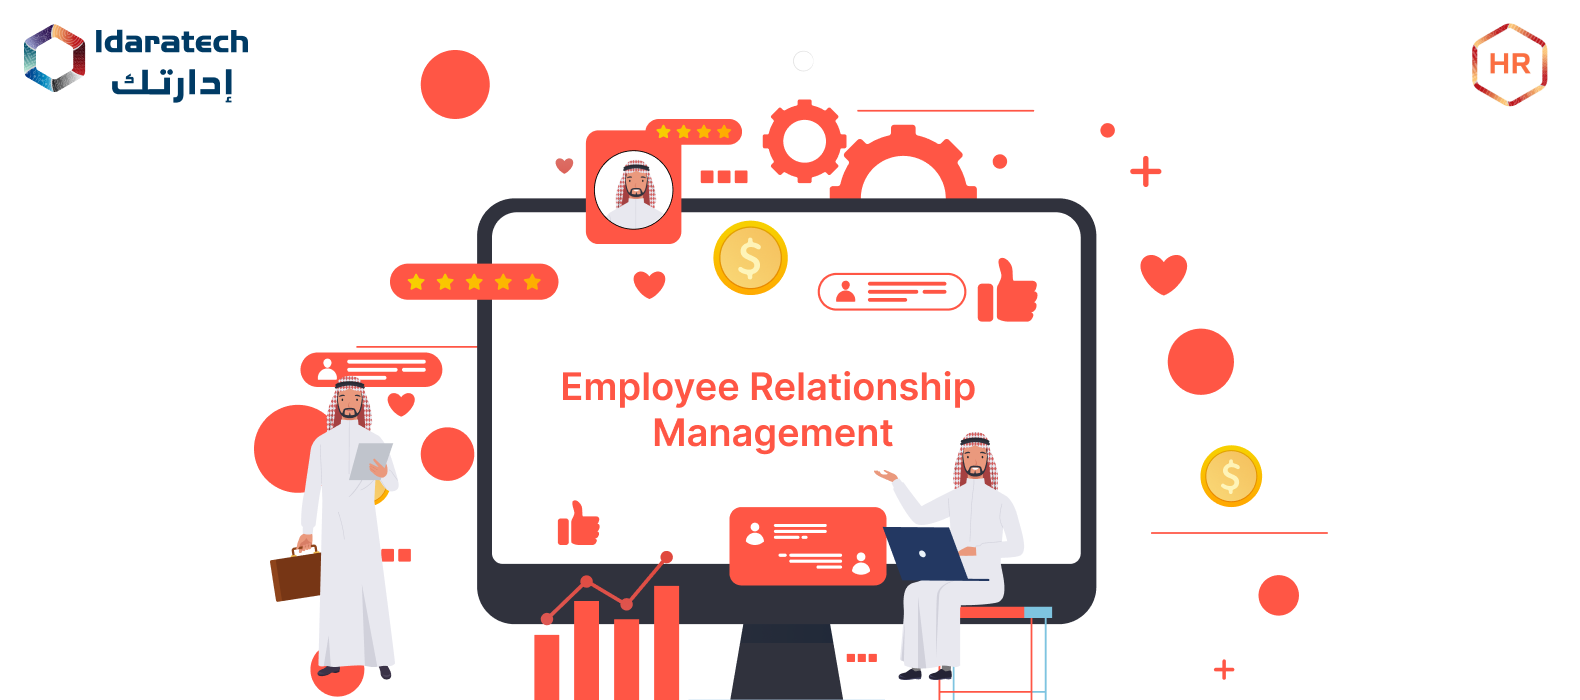 Top 5 Benefits of Employee Relations Management Software (Feature image)